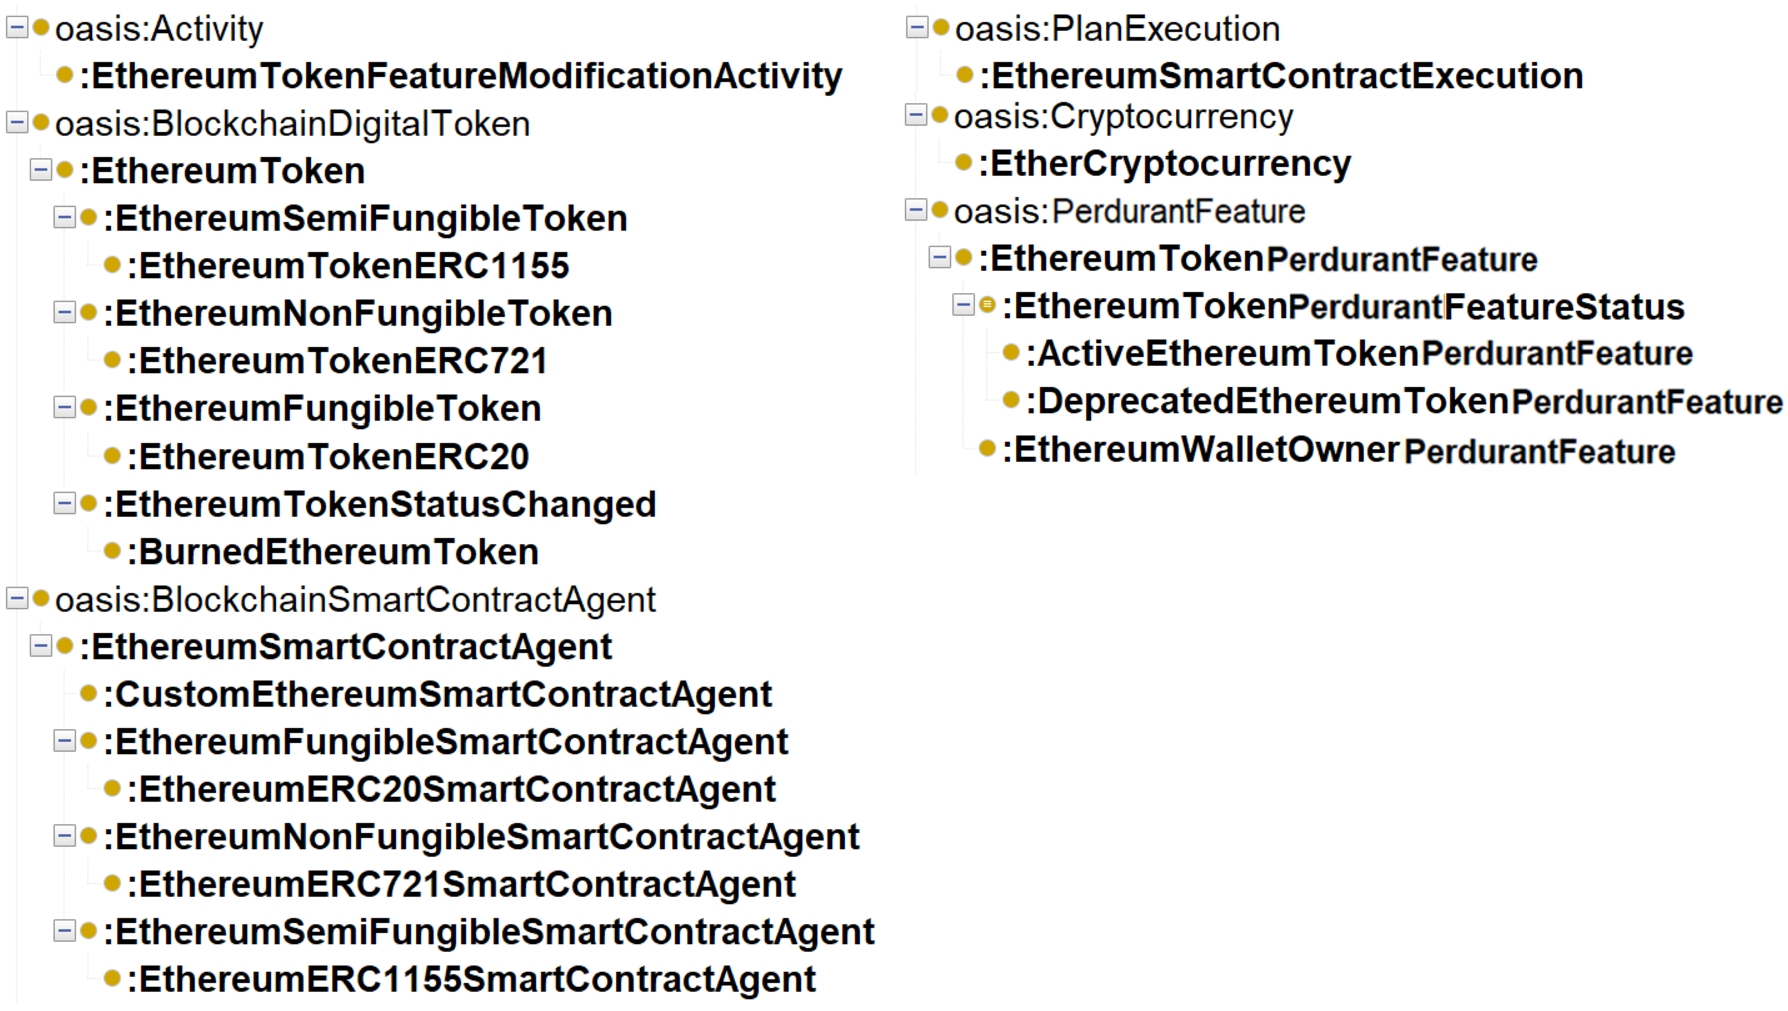 Hierarchies of classes in the OC-Ethereum ontology.